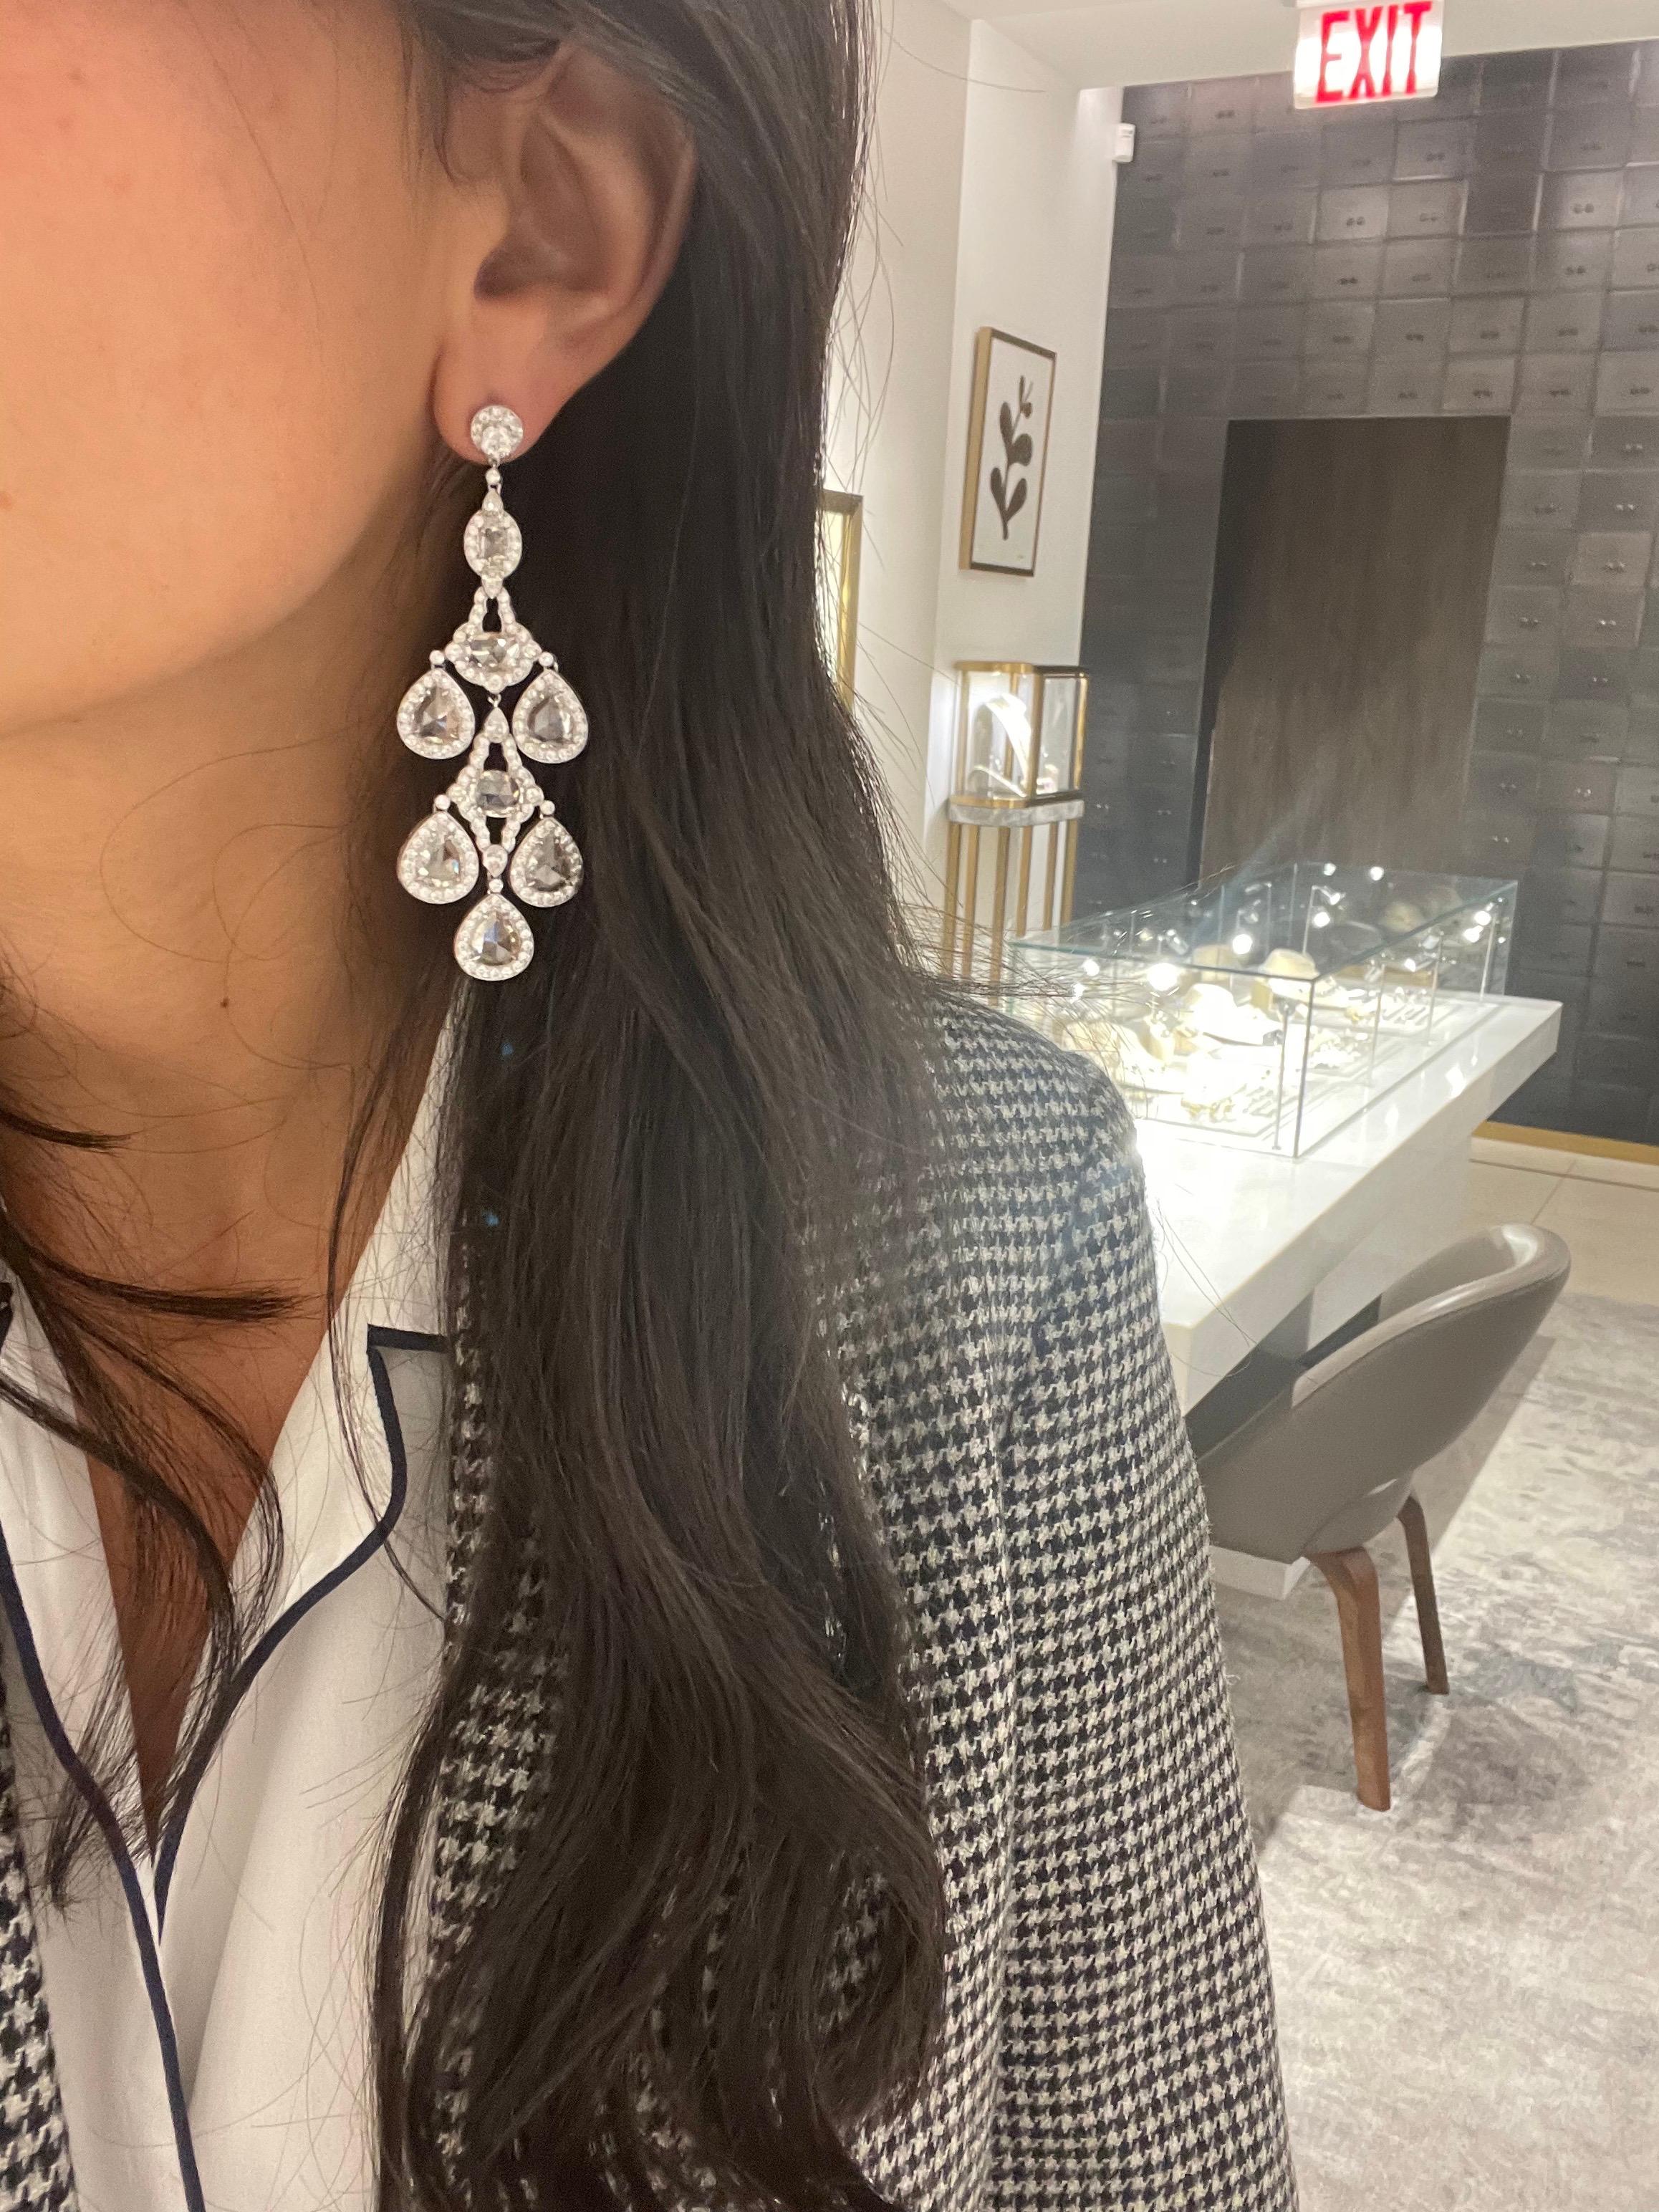 These dramatic hanging chandelier style earrings showcase rose-cut oval and pear shaped diamond centers surrounded by round micro pave diamond settings. Round brilliant diamonds are bezel set on top. 
Set in platinum with post backs. The earrings